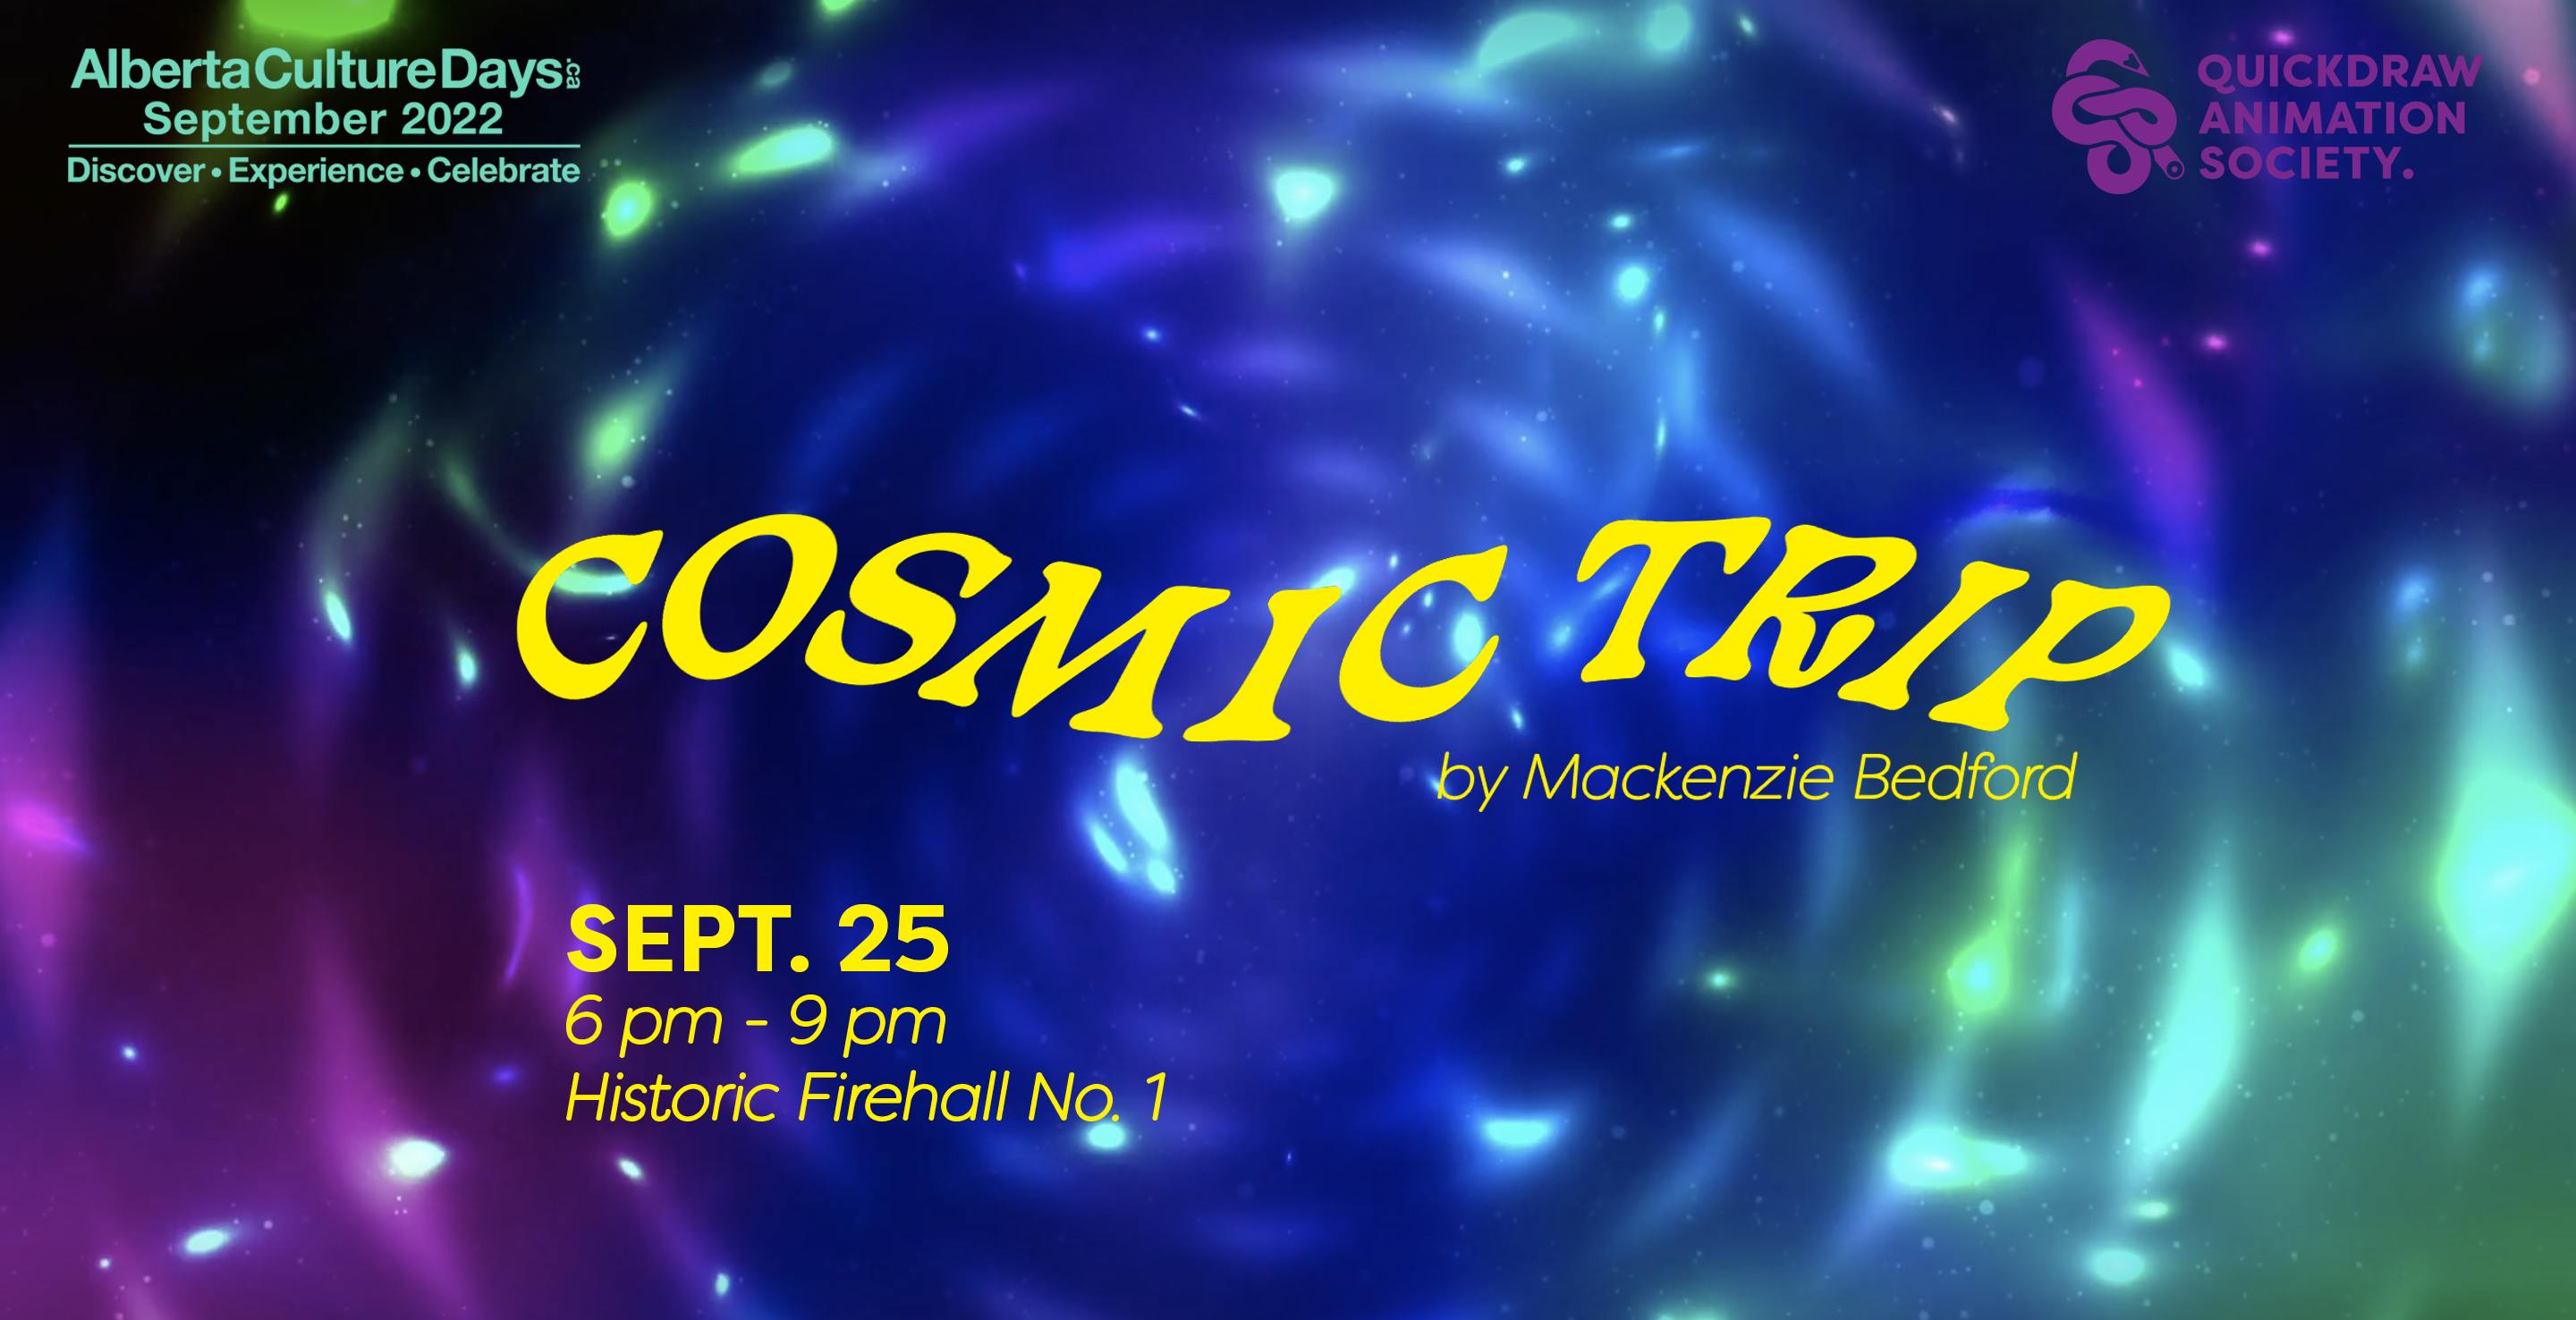 swirling vortex background. Text reads: 
Top Left: AlbertaCultureDays.ca September 2022. Discover - experience - celebrate
Top Right: Quickdraw Animation Society
Middle: Cosmic Trip by Mackenzie Bedford
Bottom: Sept 25
6-9pm
Historic Firehall No.1